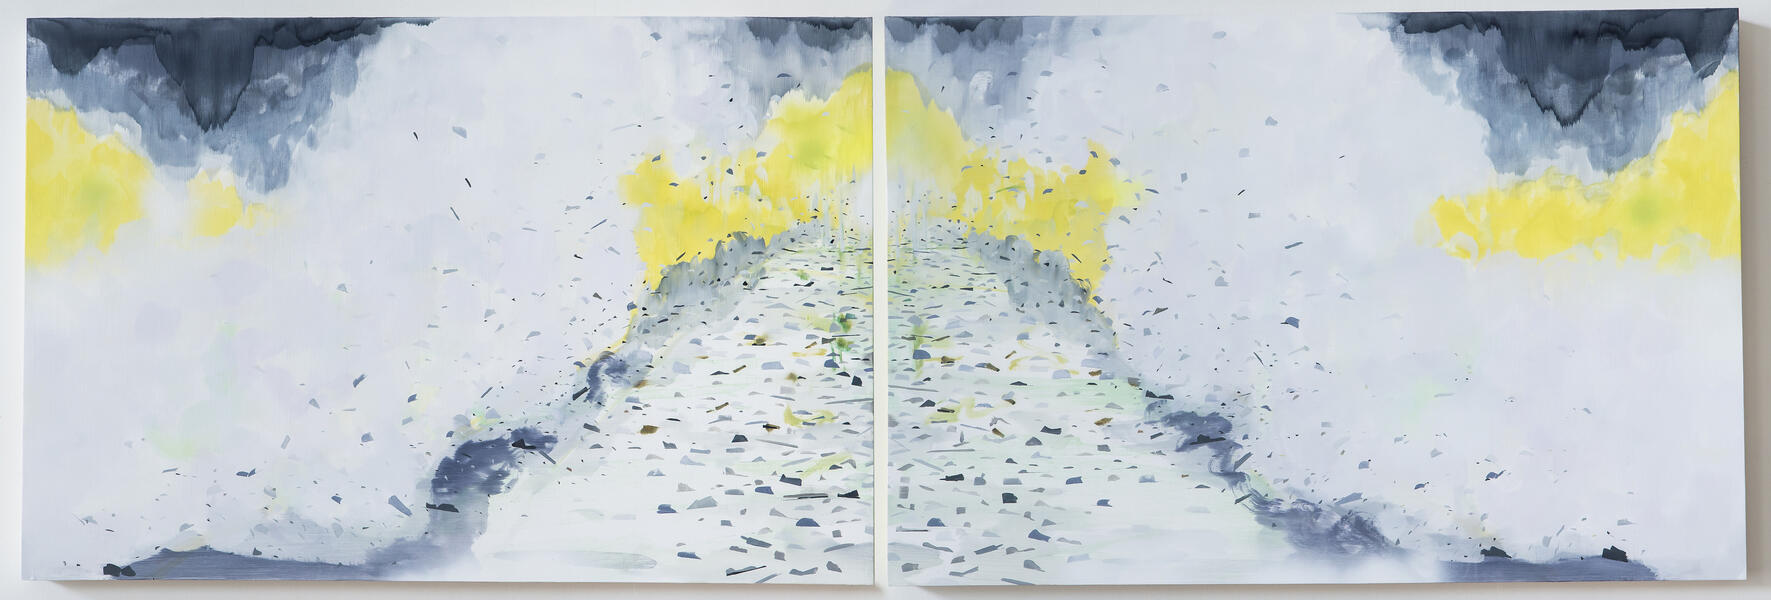 how to lose without negotiating 2016, oil on panel, Diptych 24 x 73 inches, each panel is 24 x 36 inches